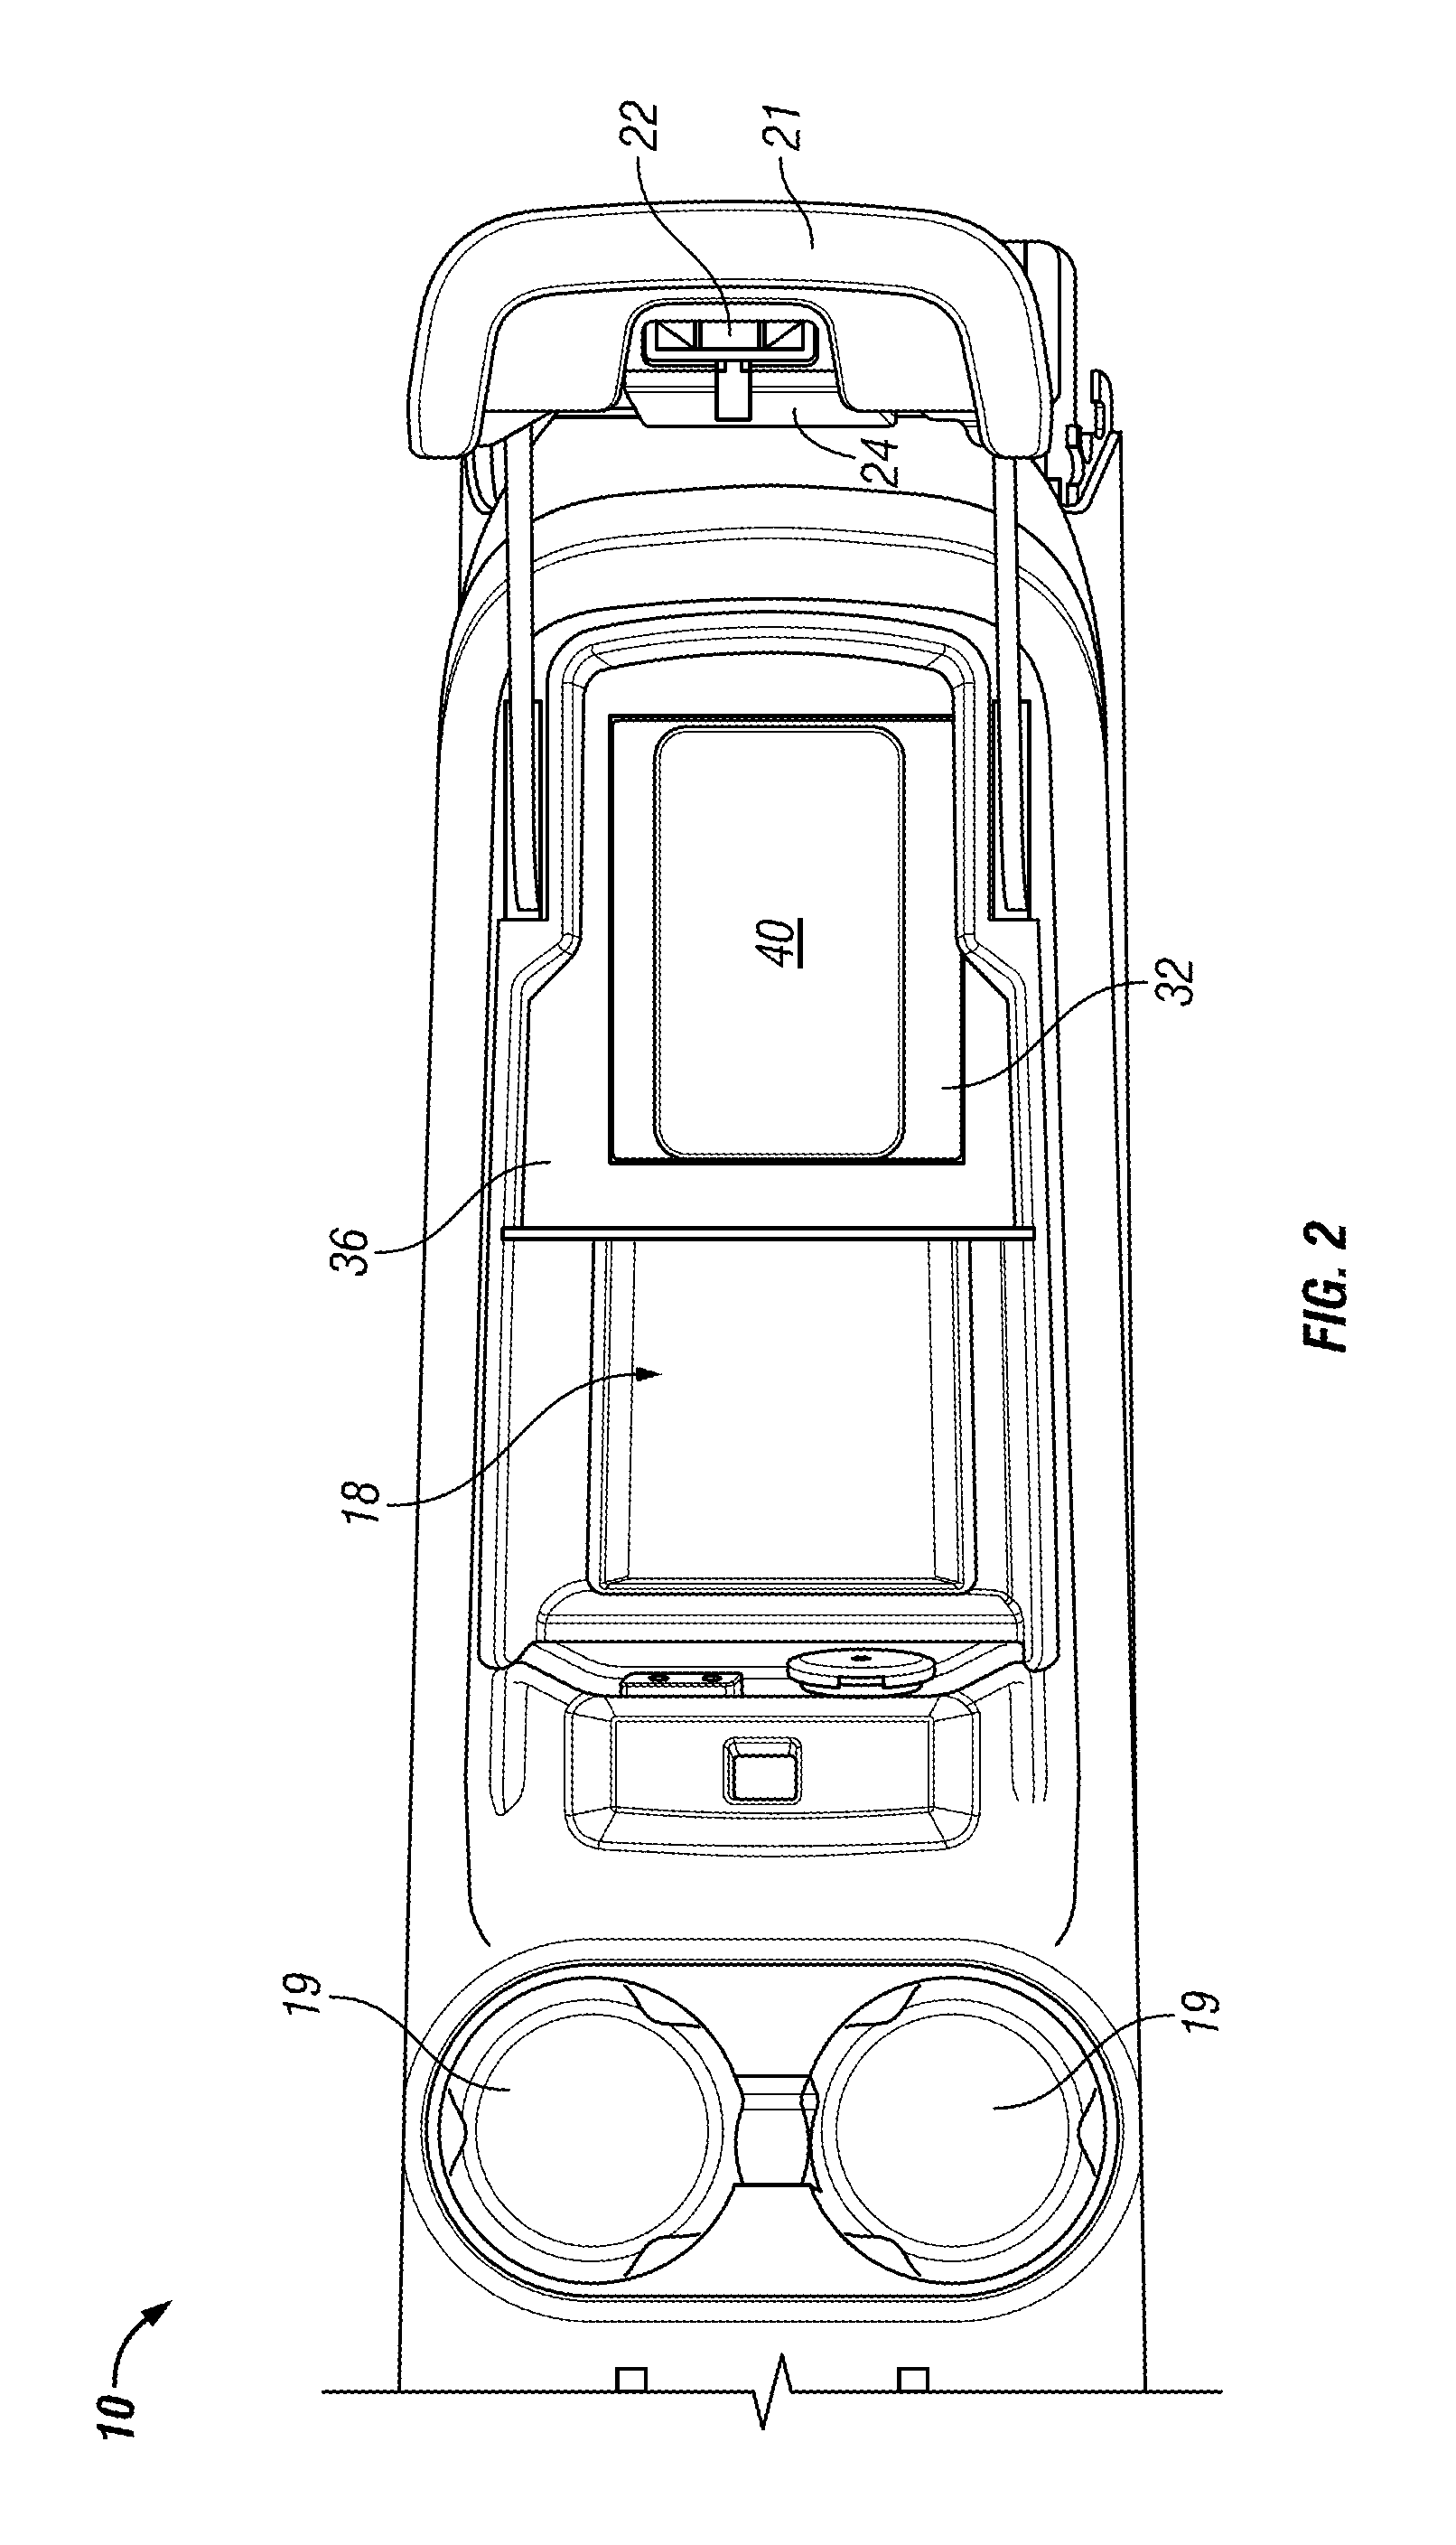 Wireless battery charging apparatus mounted in a vehicle designed to reduce electromagnetic interference